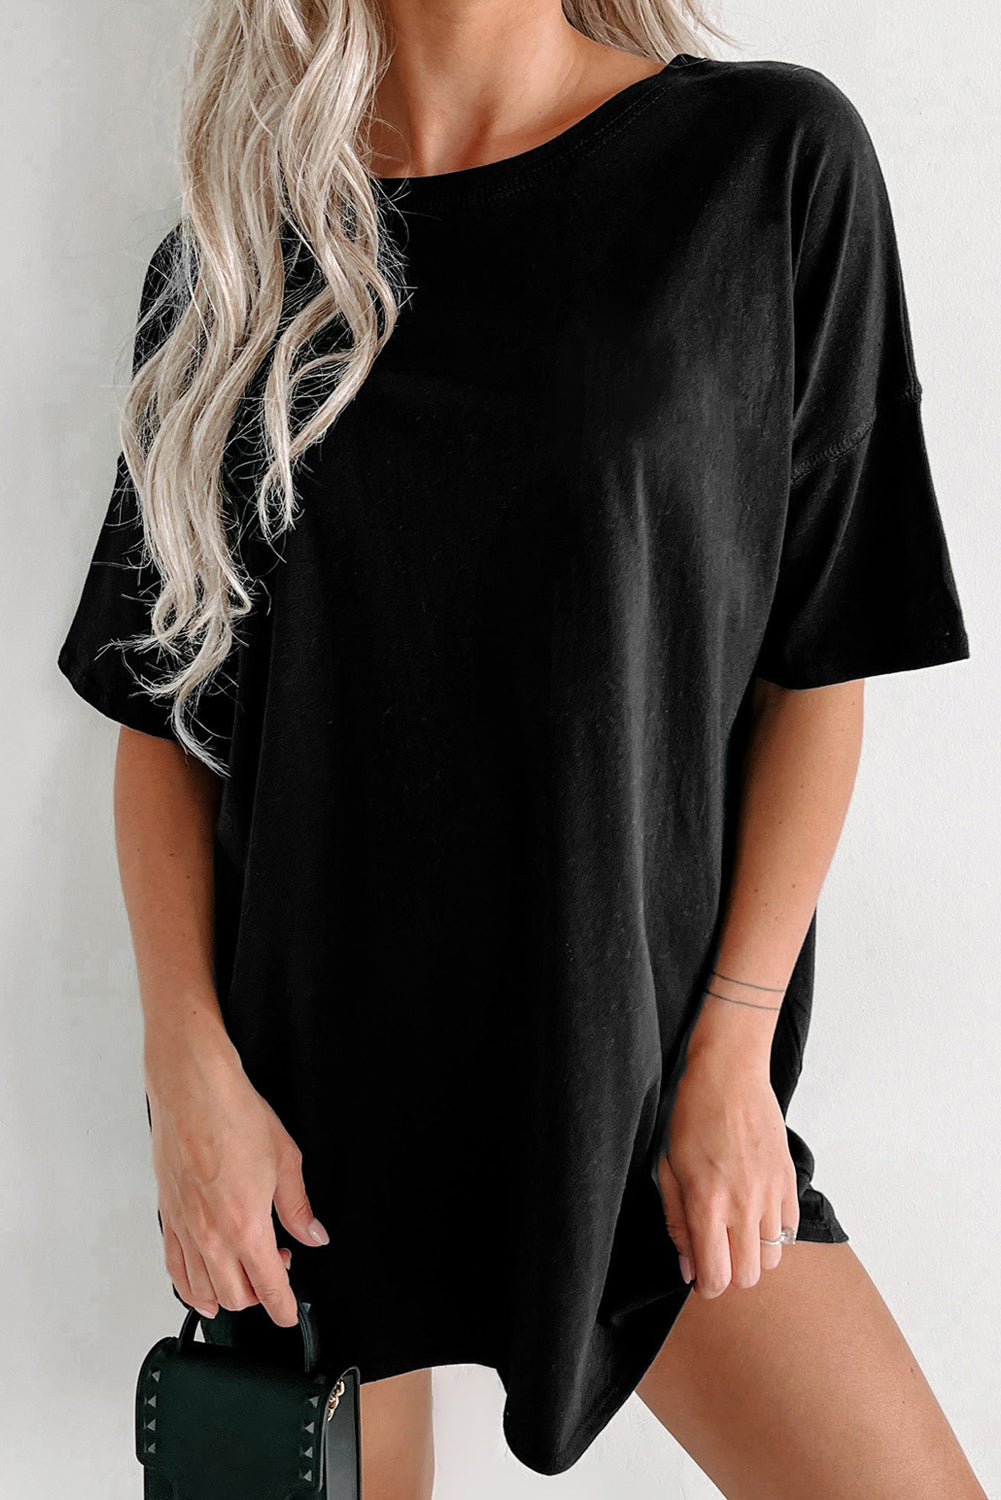 Black Solid Color Round Neck Basic Tunic T Shirt